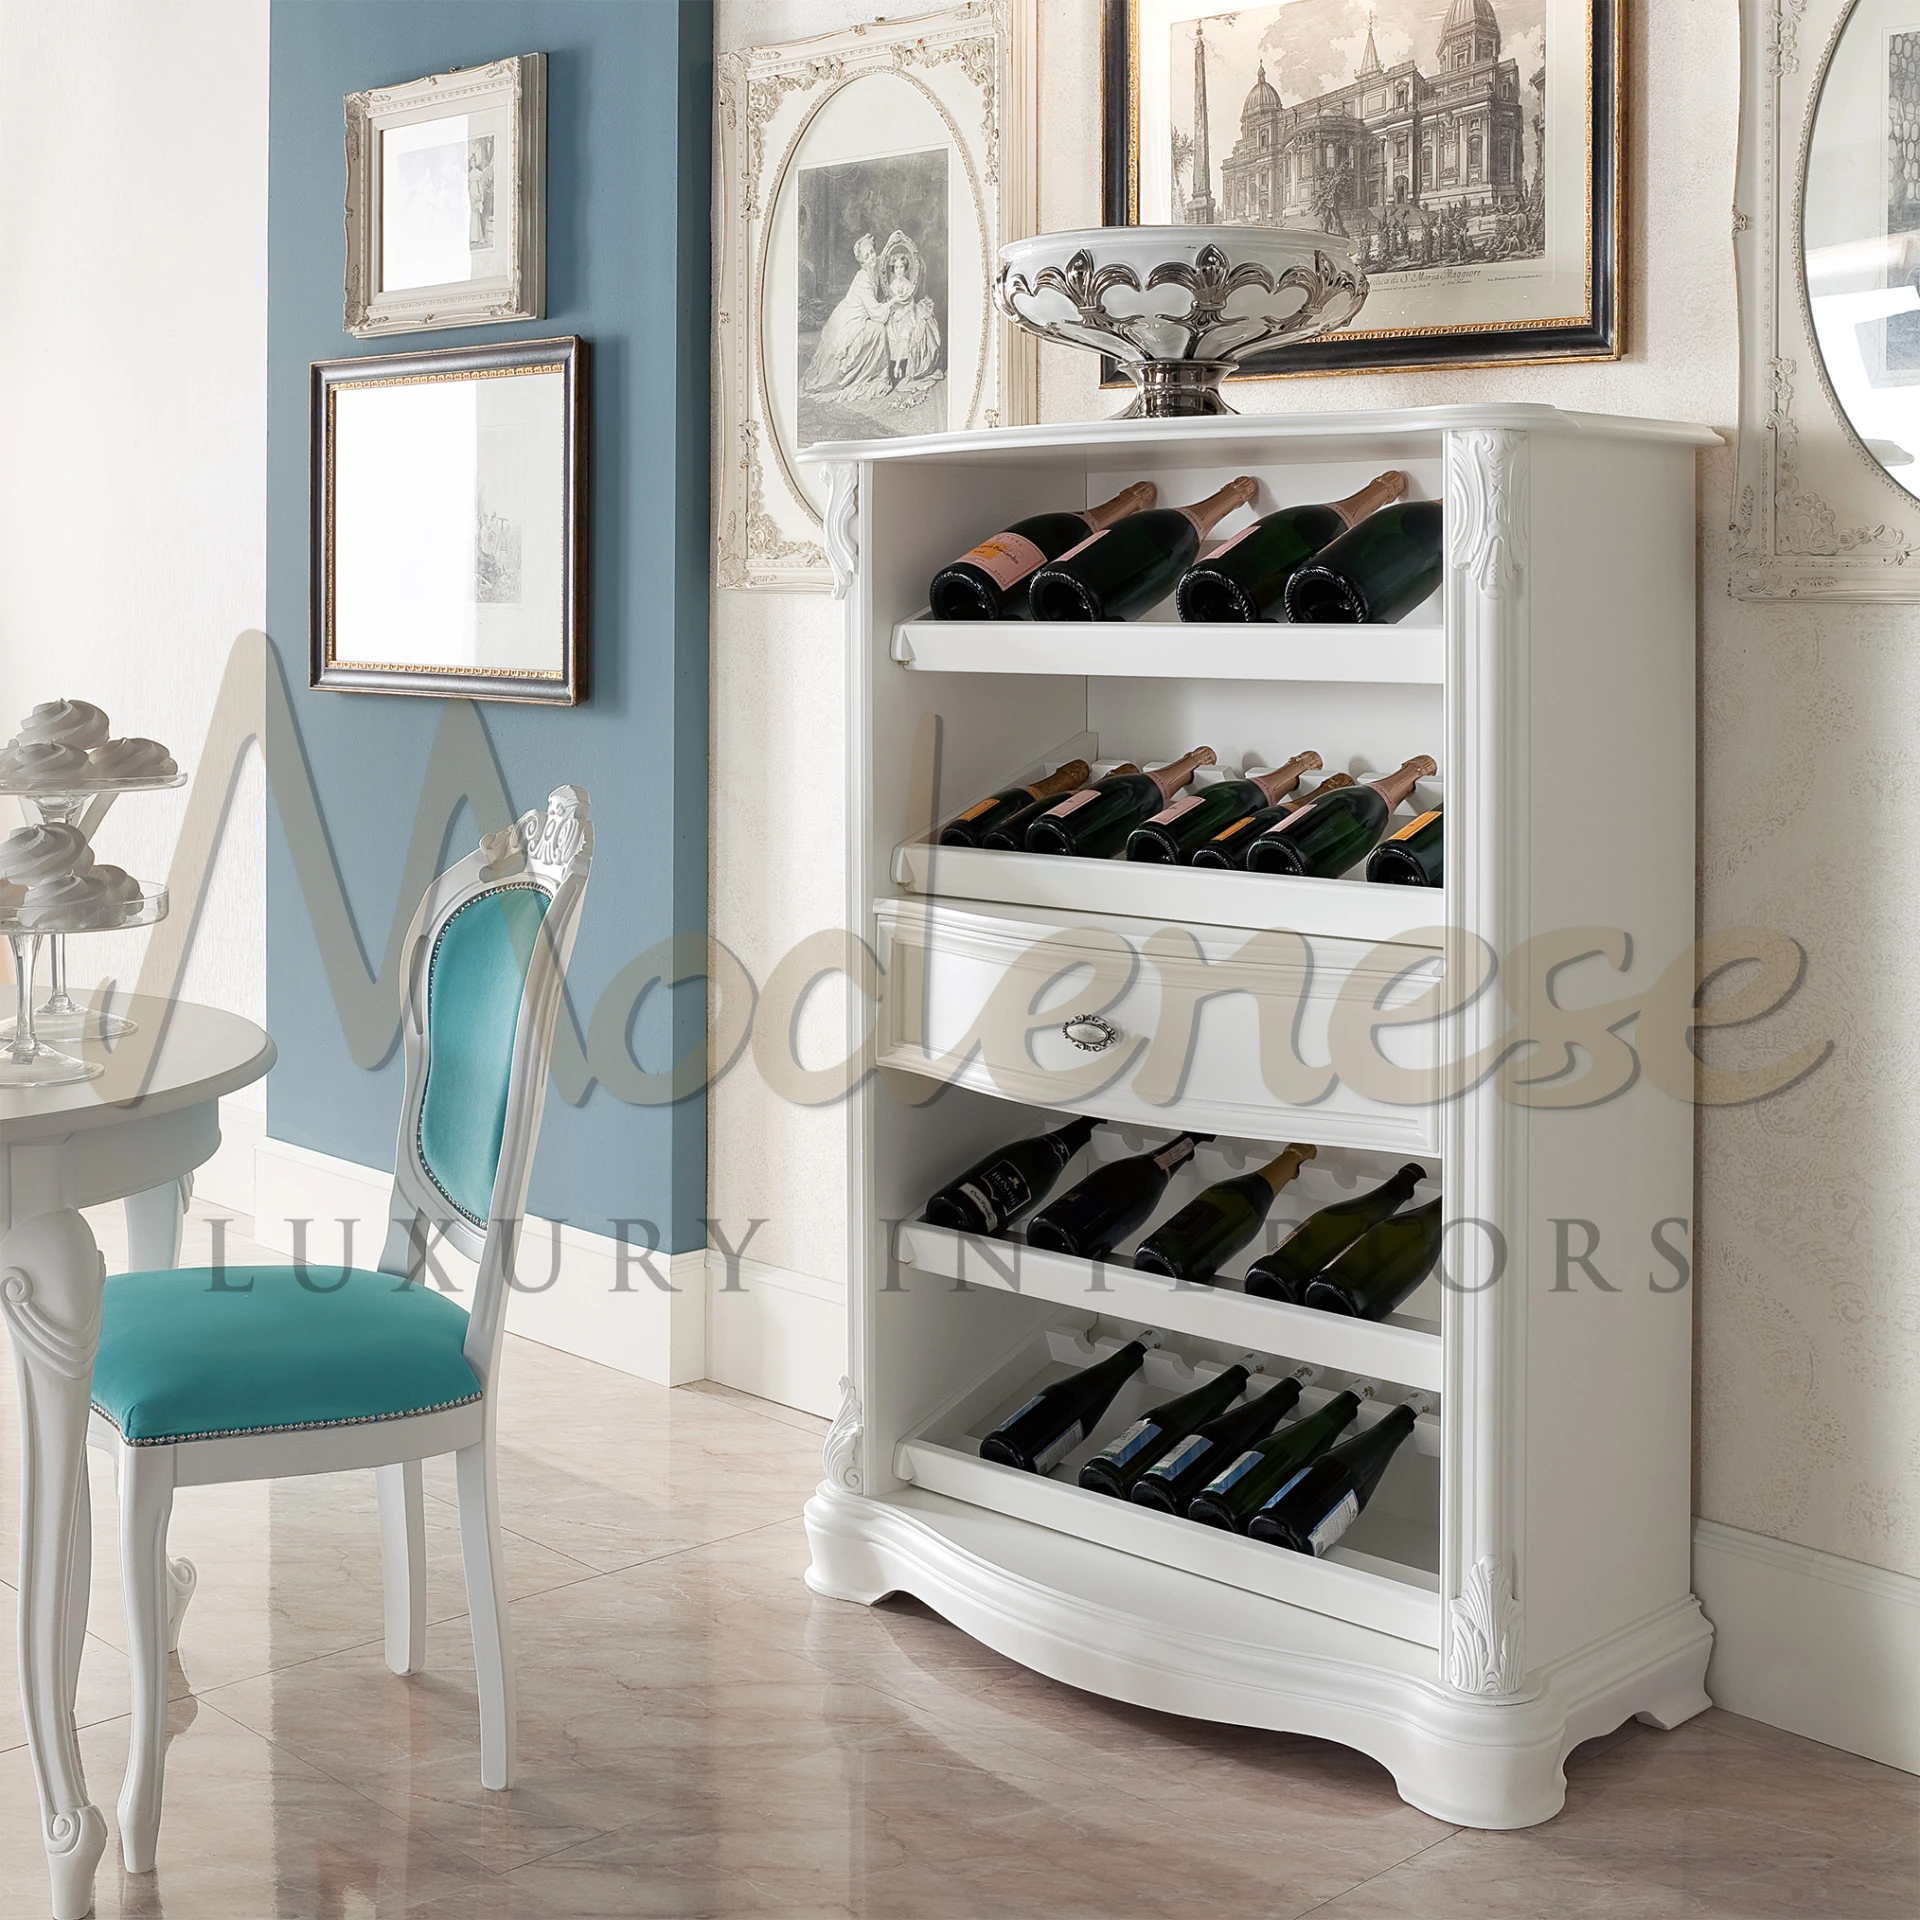 This rack offers more than just storage, with a drawer and shelves along with room interior. Solid wood construction, elegantly lacquered in white.